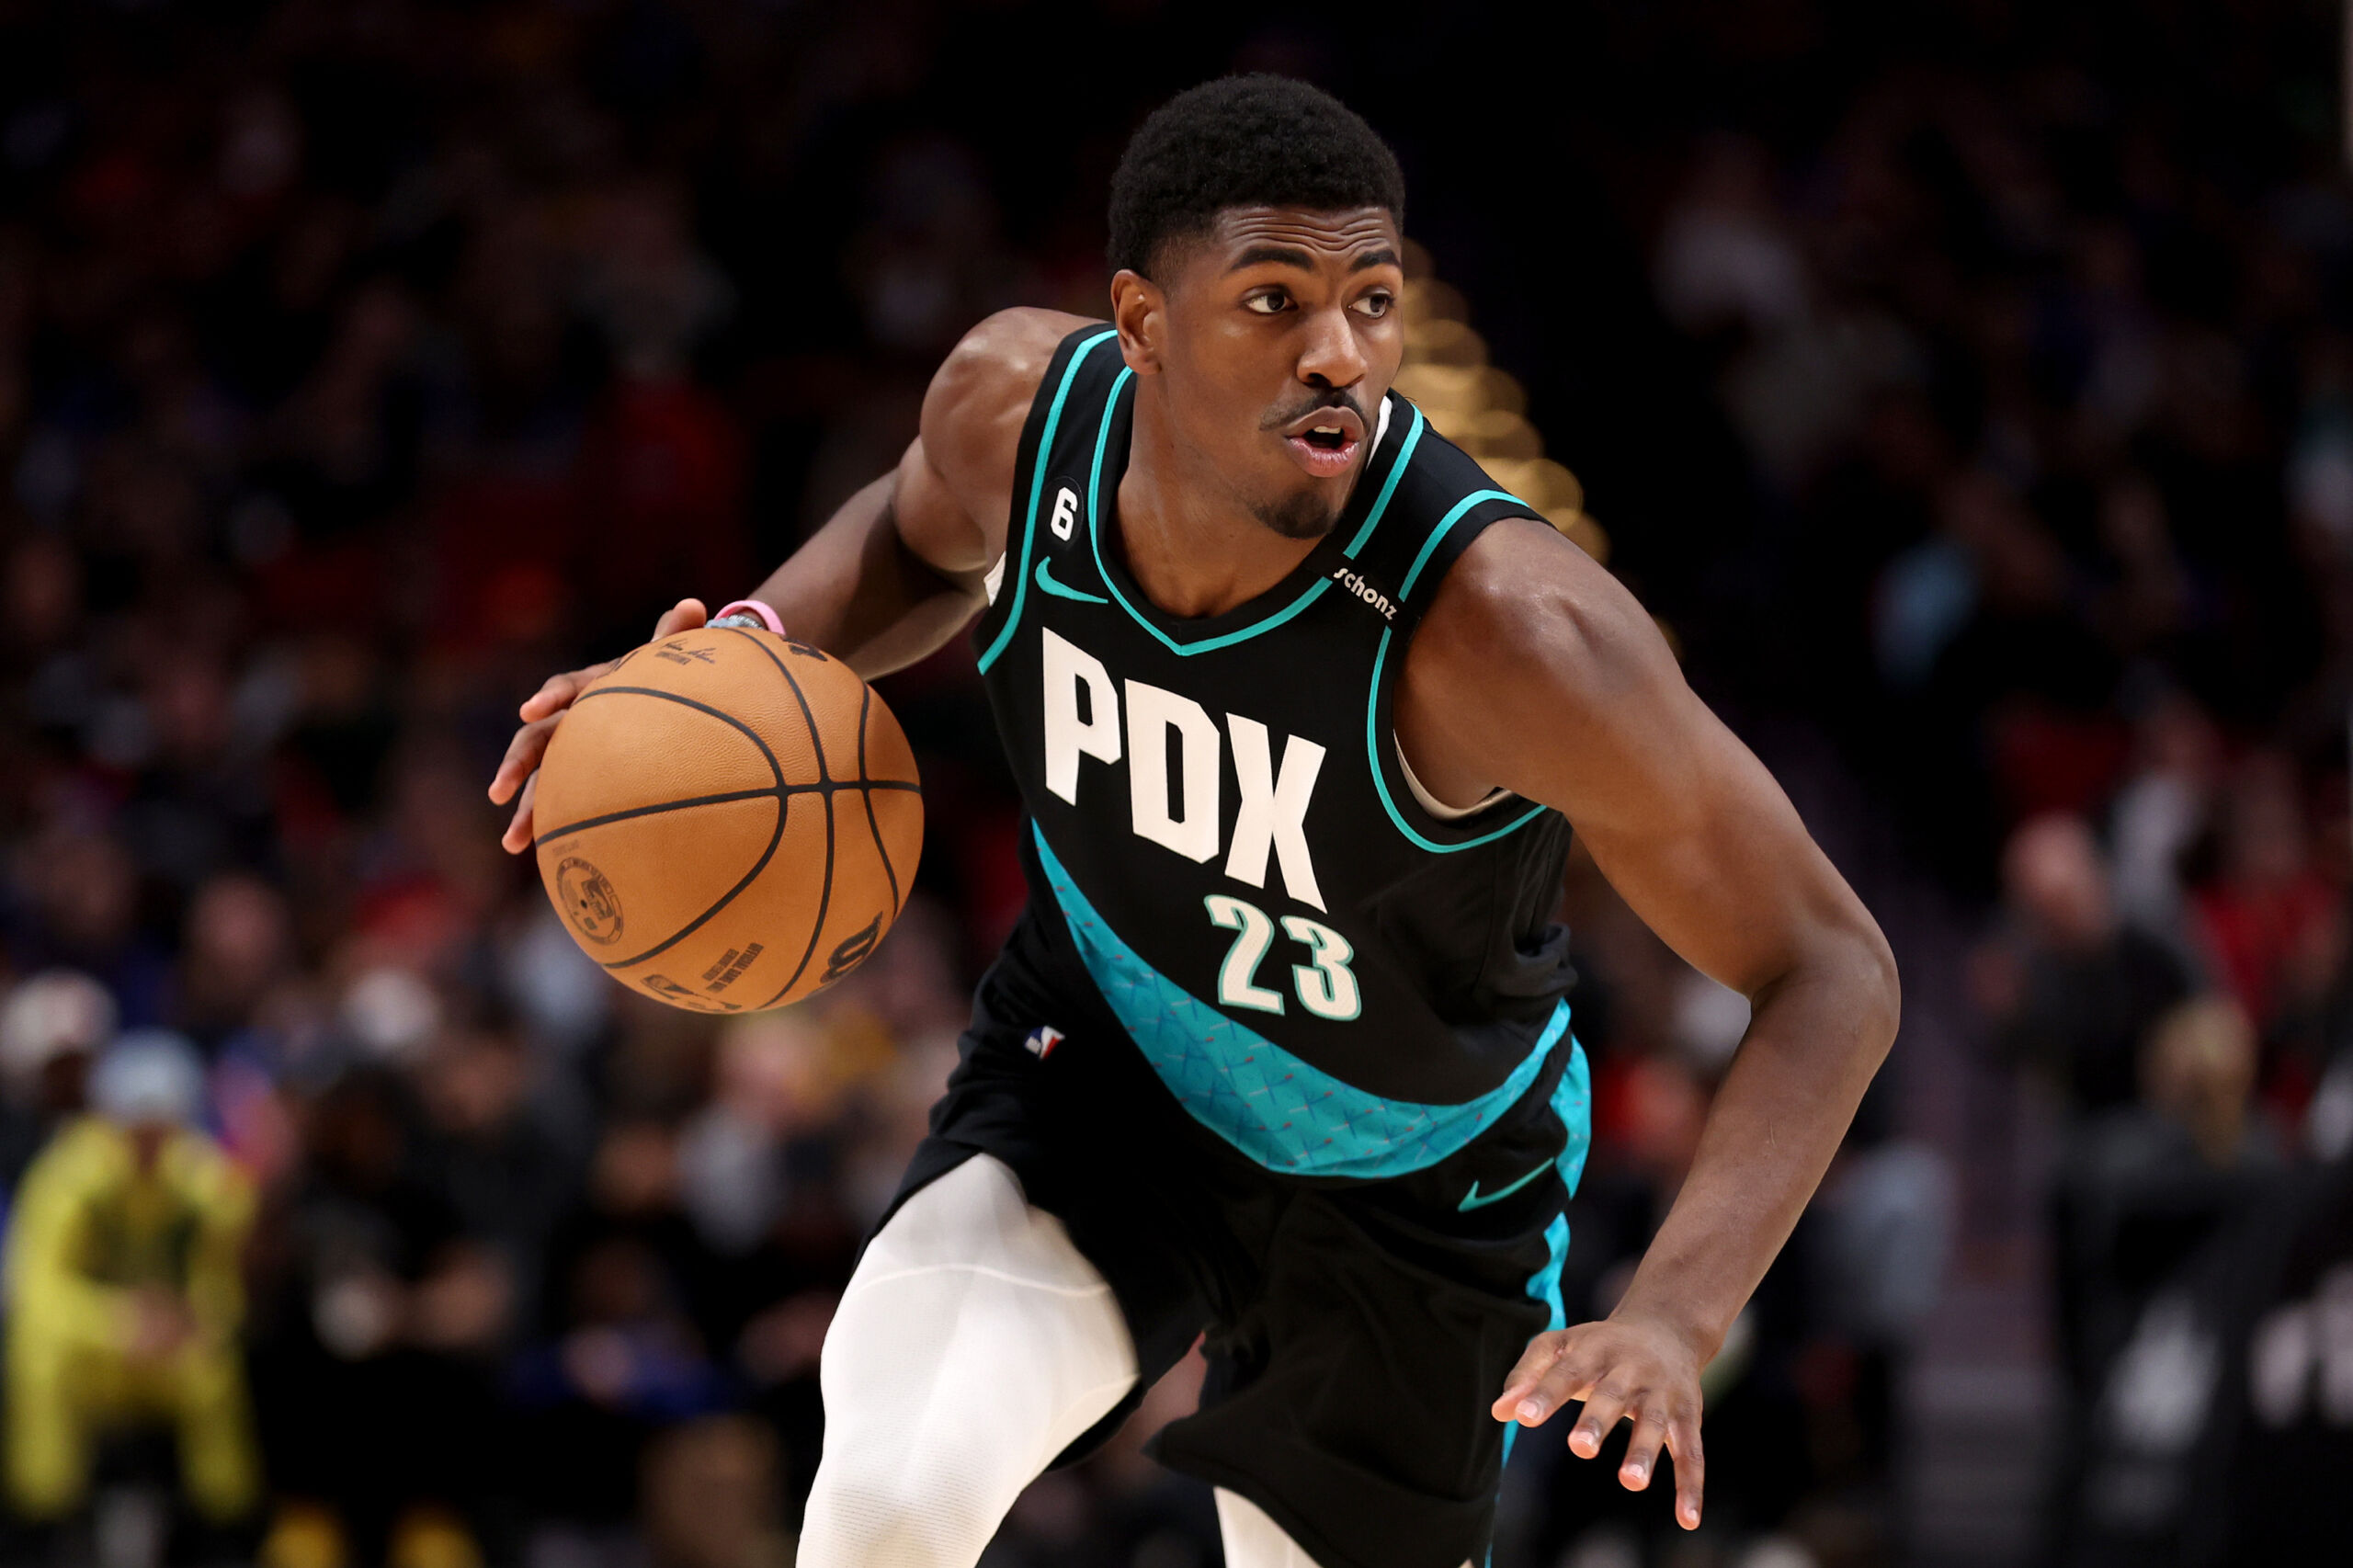 Charlotte Hornets: 2 Available free agents to target